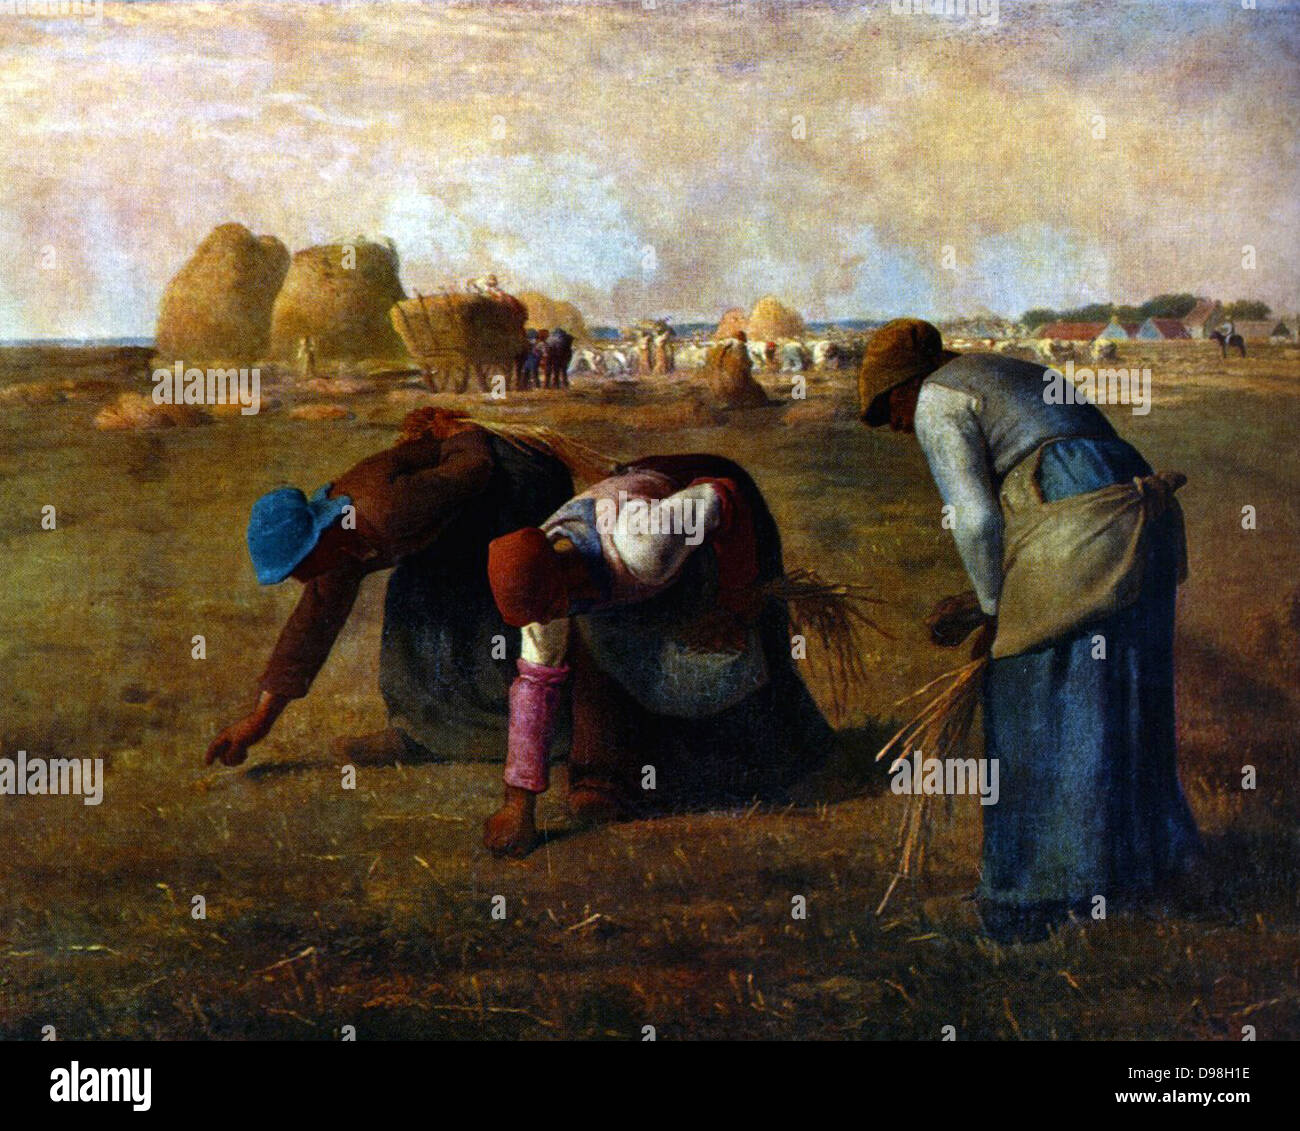 Jean-Francois Millet, The Gleaners (1857 Stock Photo - Alamy